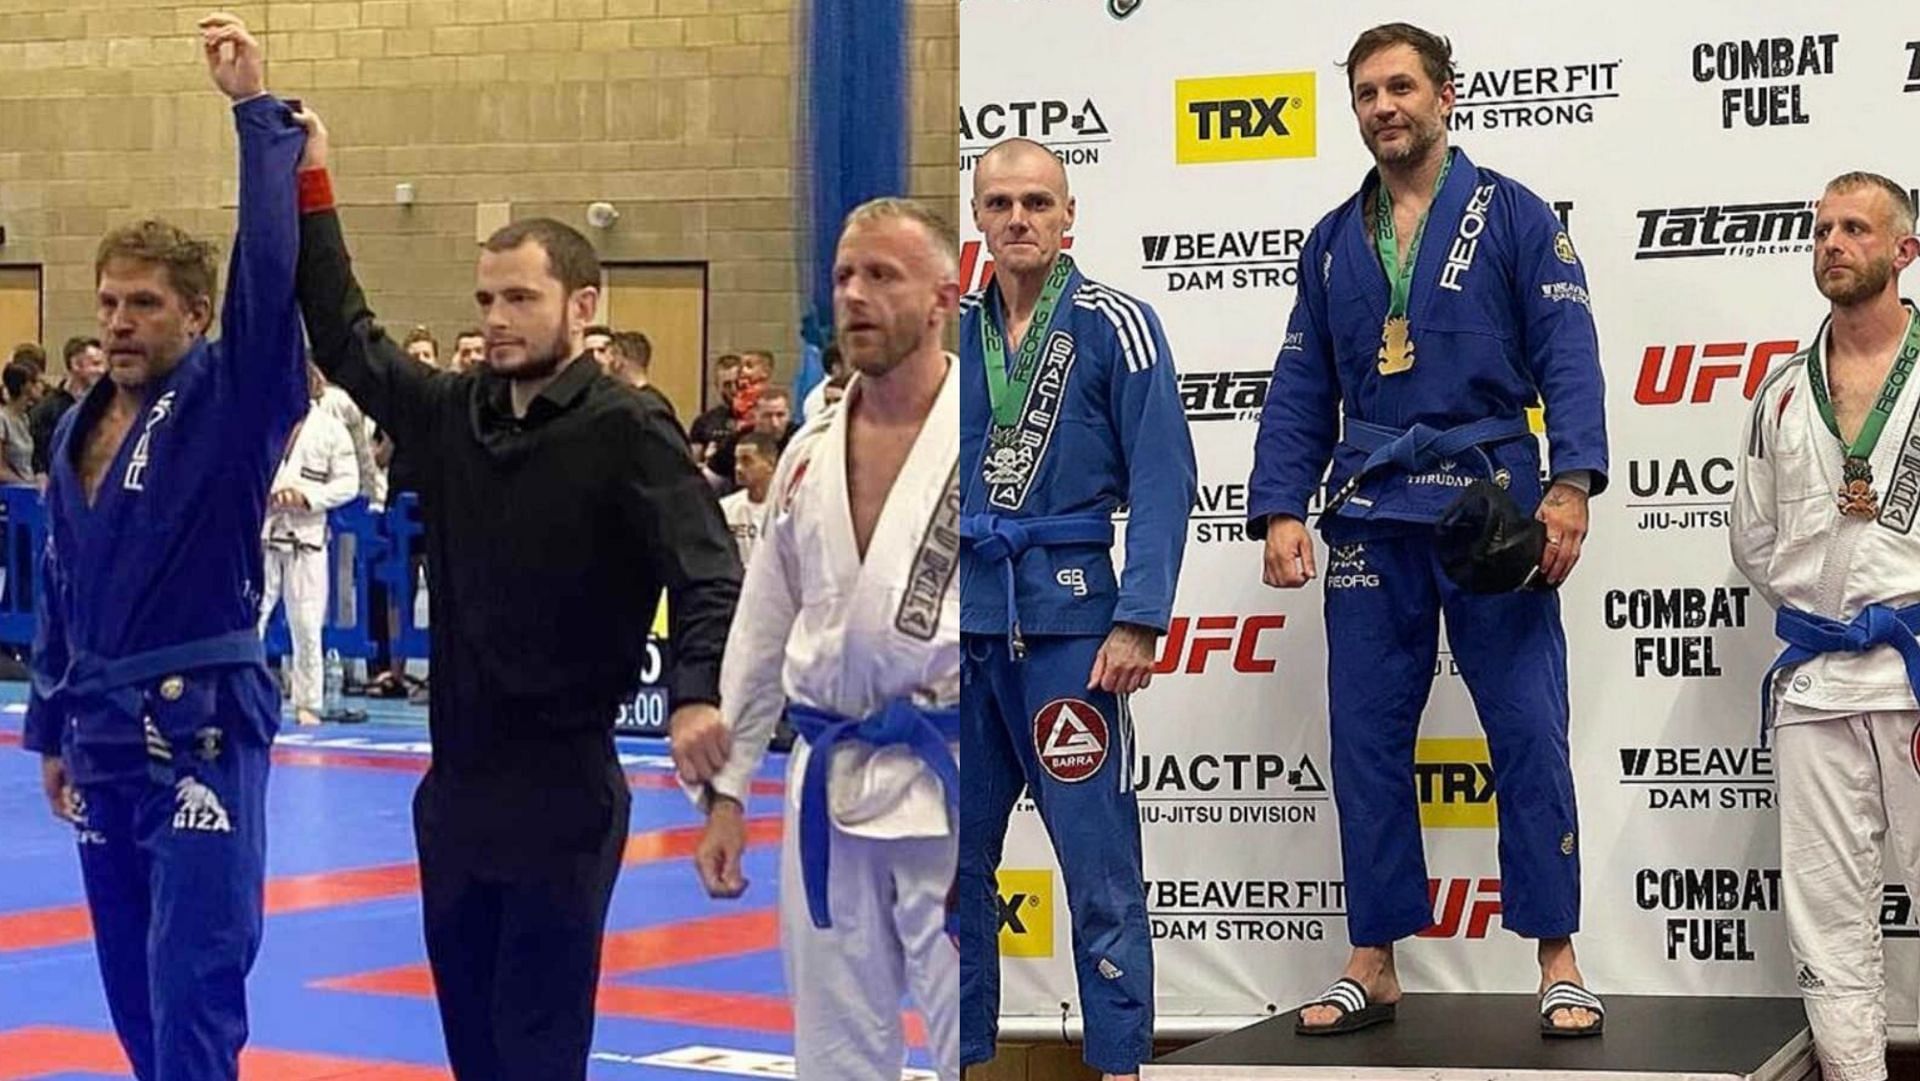 Tom Hardy wins two gold medals at Jiu-Jitsu competition (Image via geoffpavey/TikTok, and RosssEdmonds/Twitter)